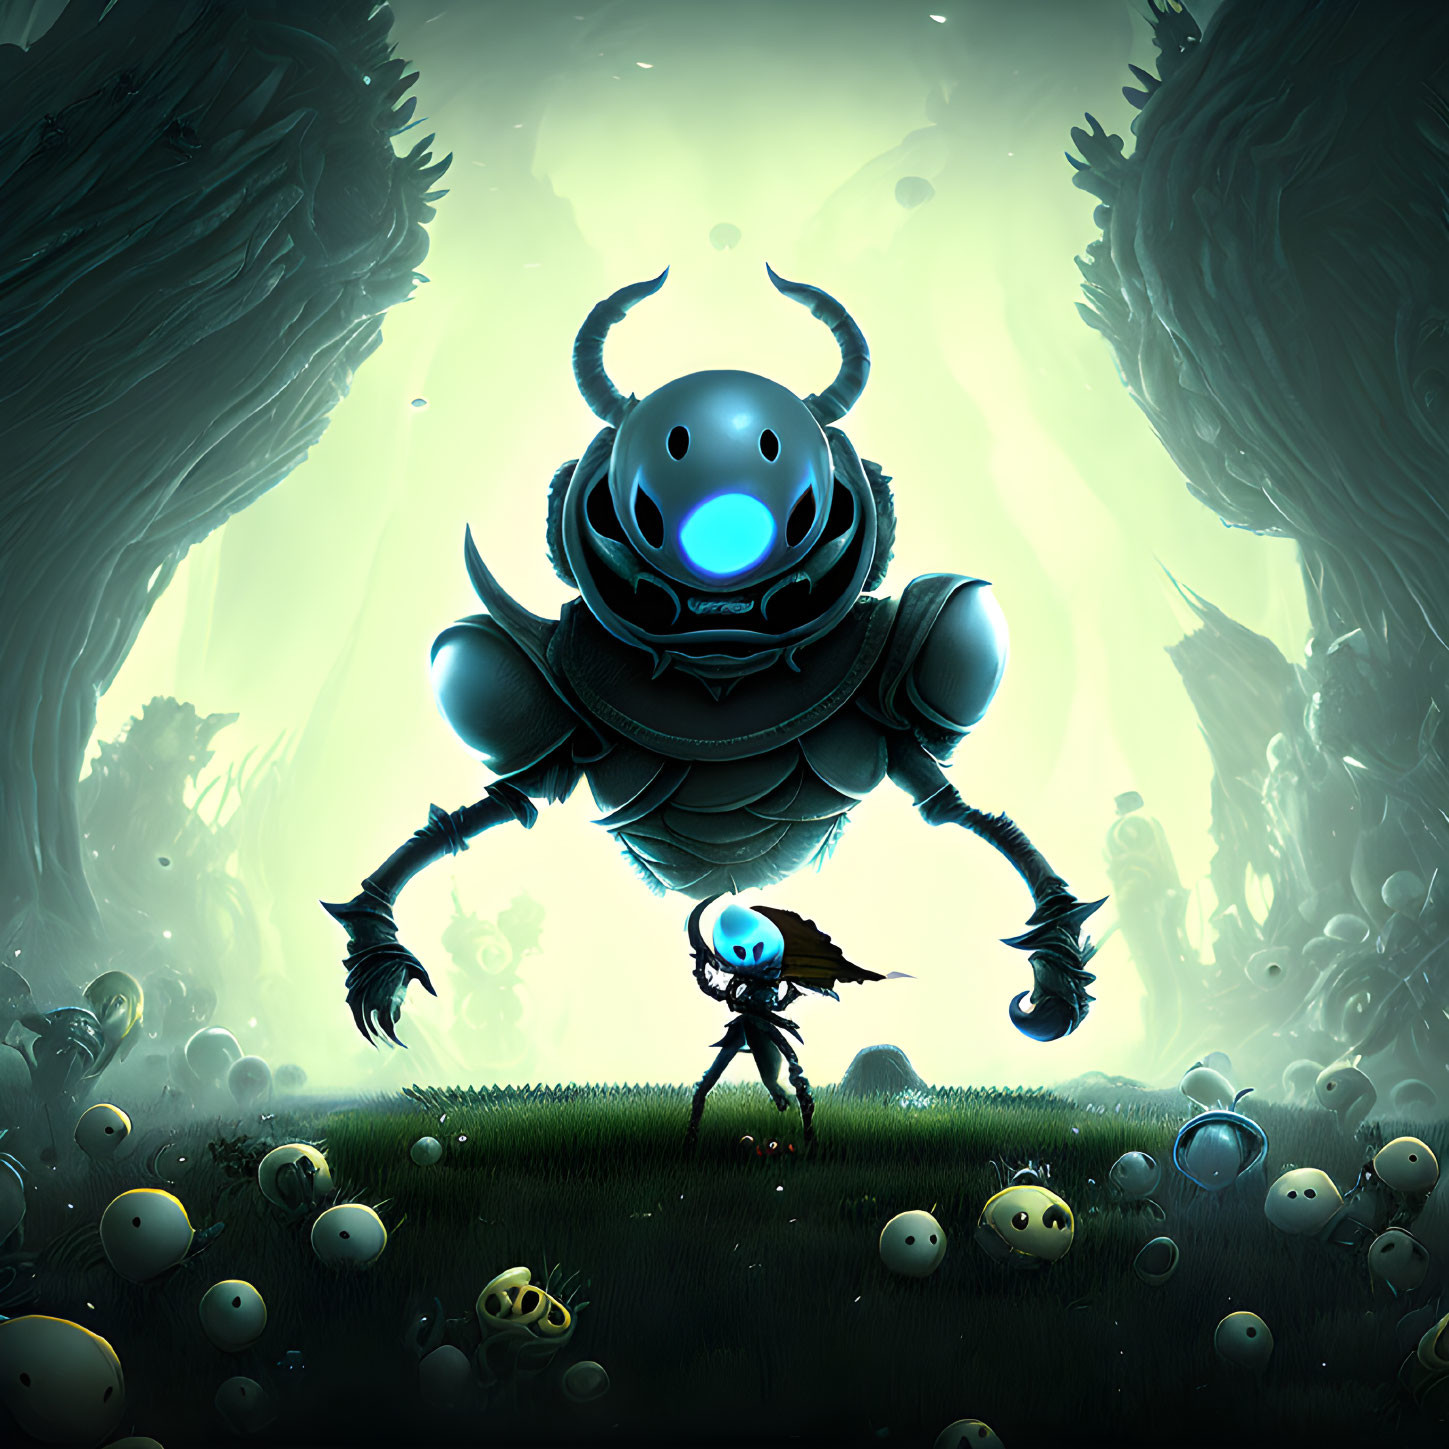 Illustration of humanoid character in cape with skull-like head in eerie forest with beetle-like creature and glowing